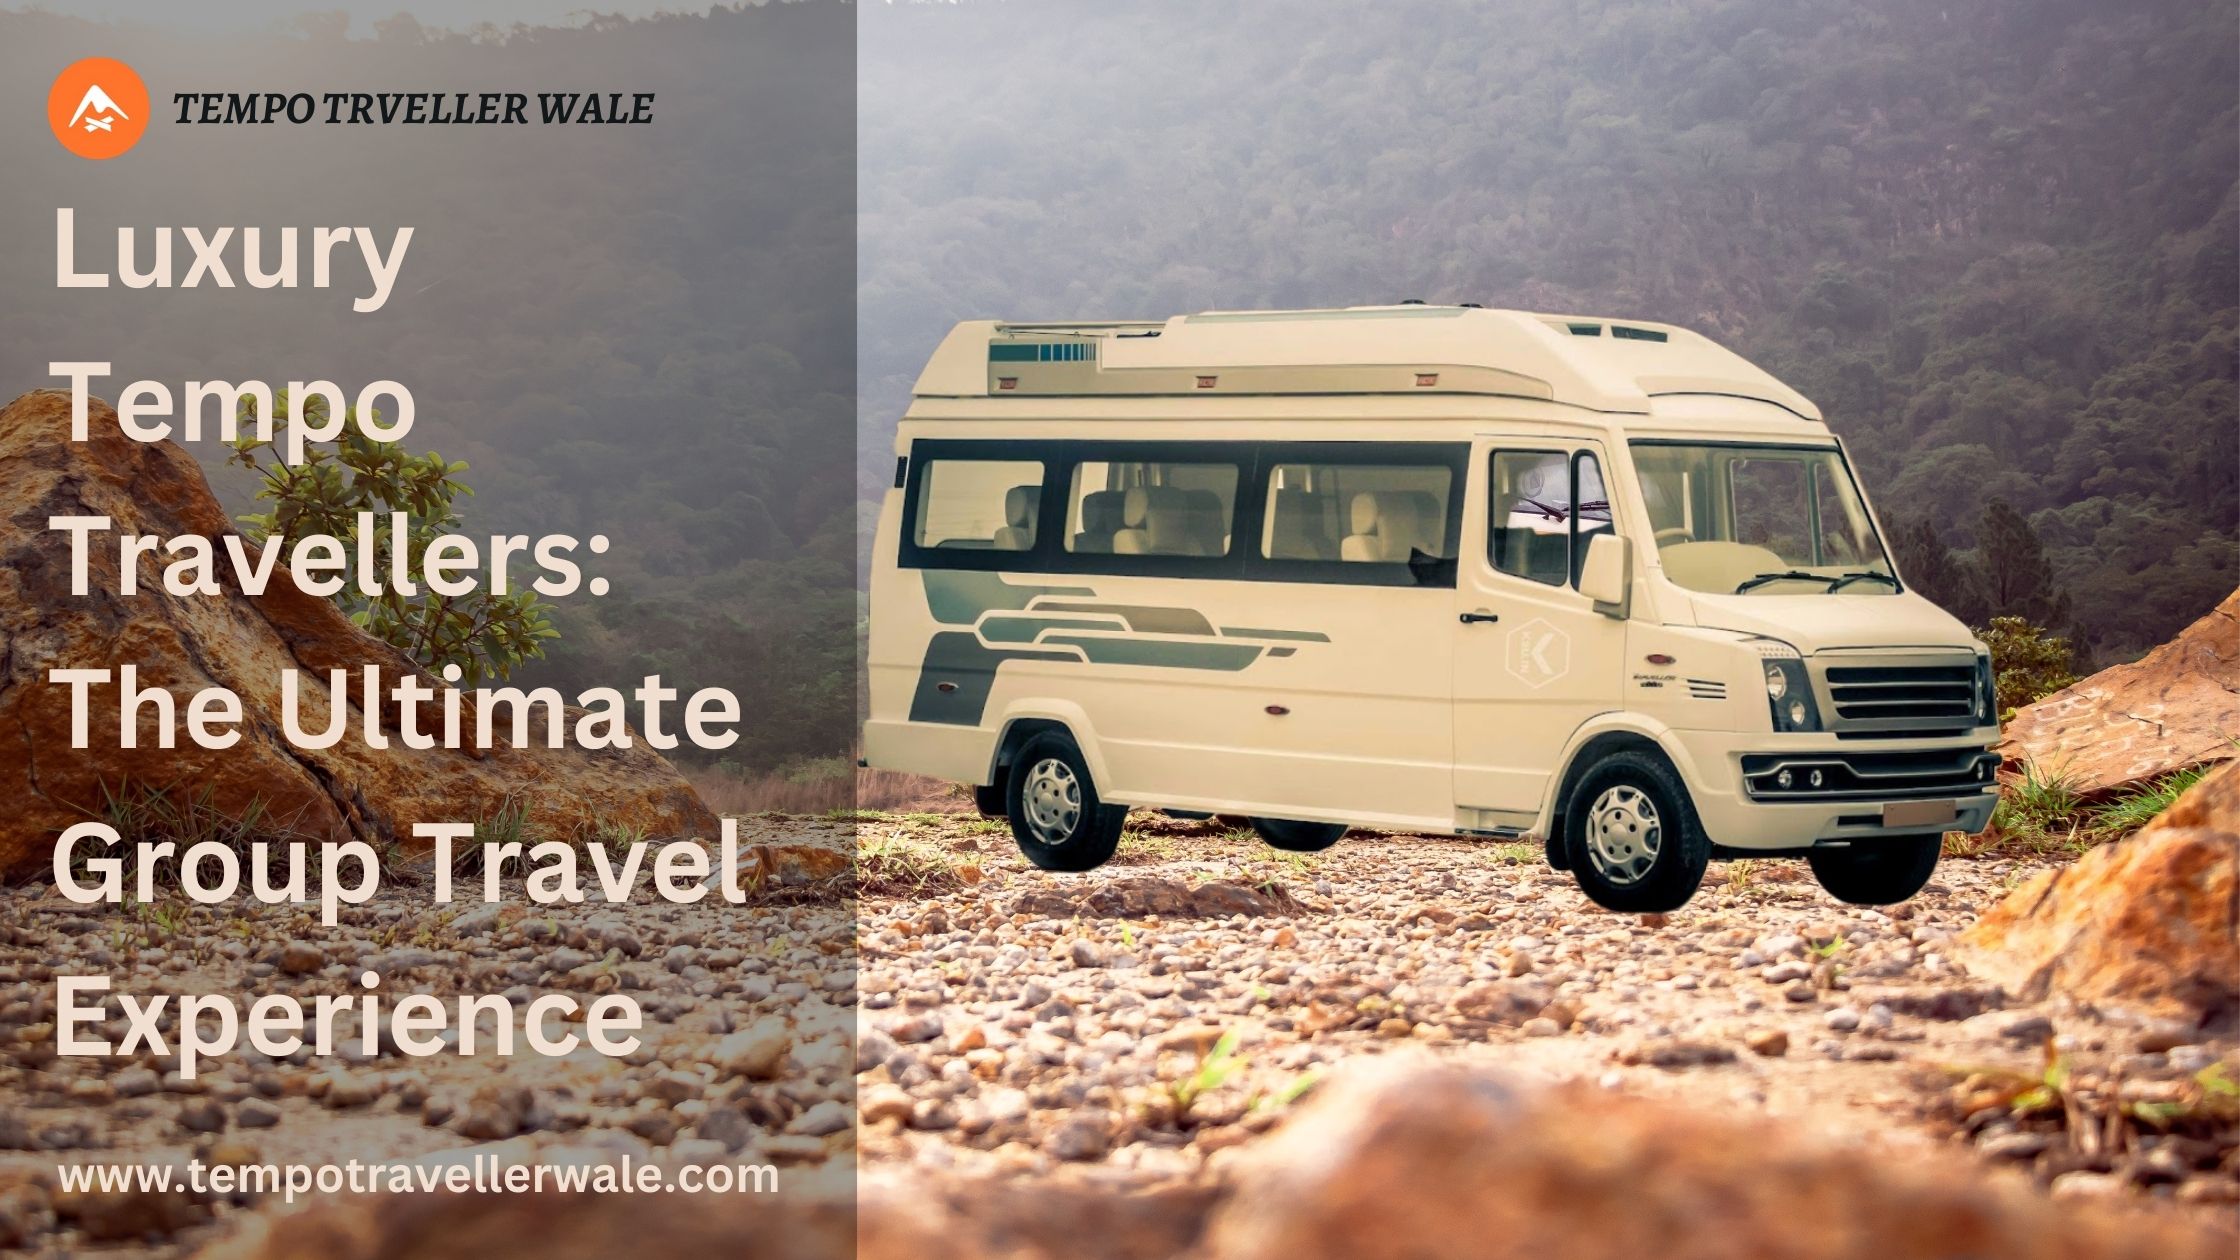 Luxury Tempo Travellers: The Ultimate Group Travel